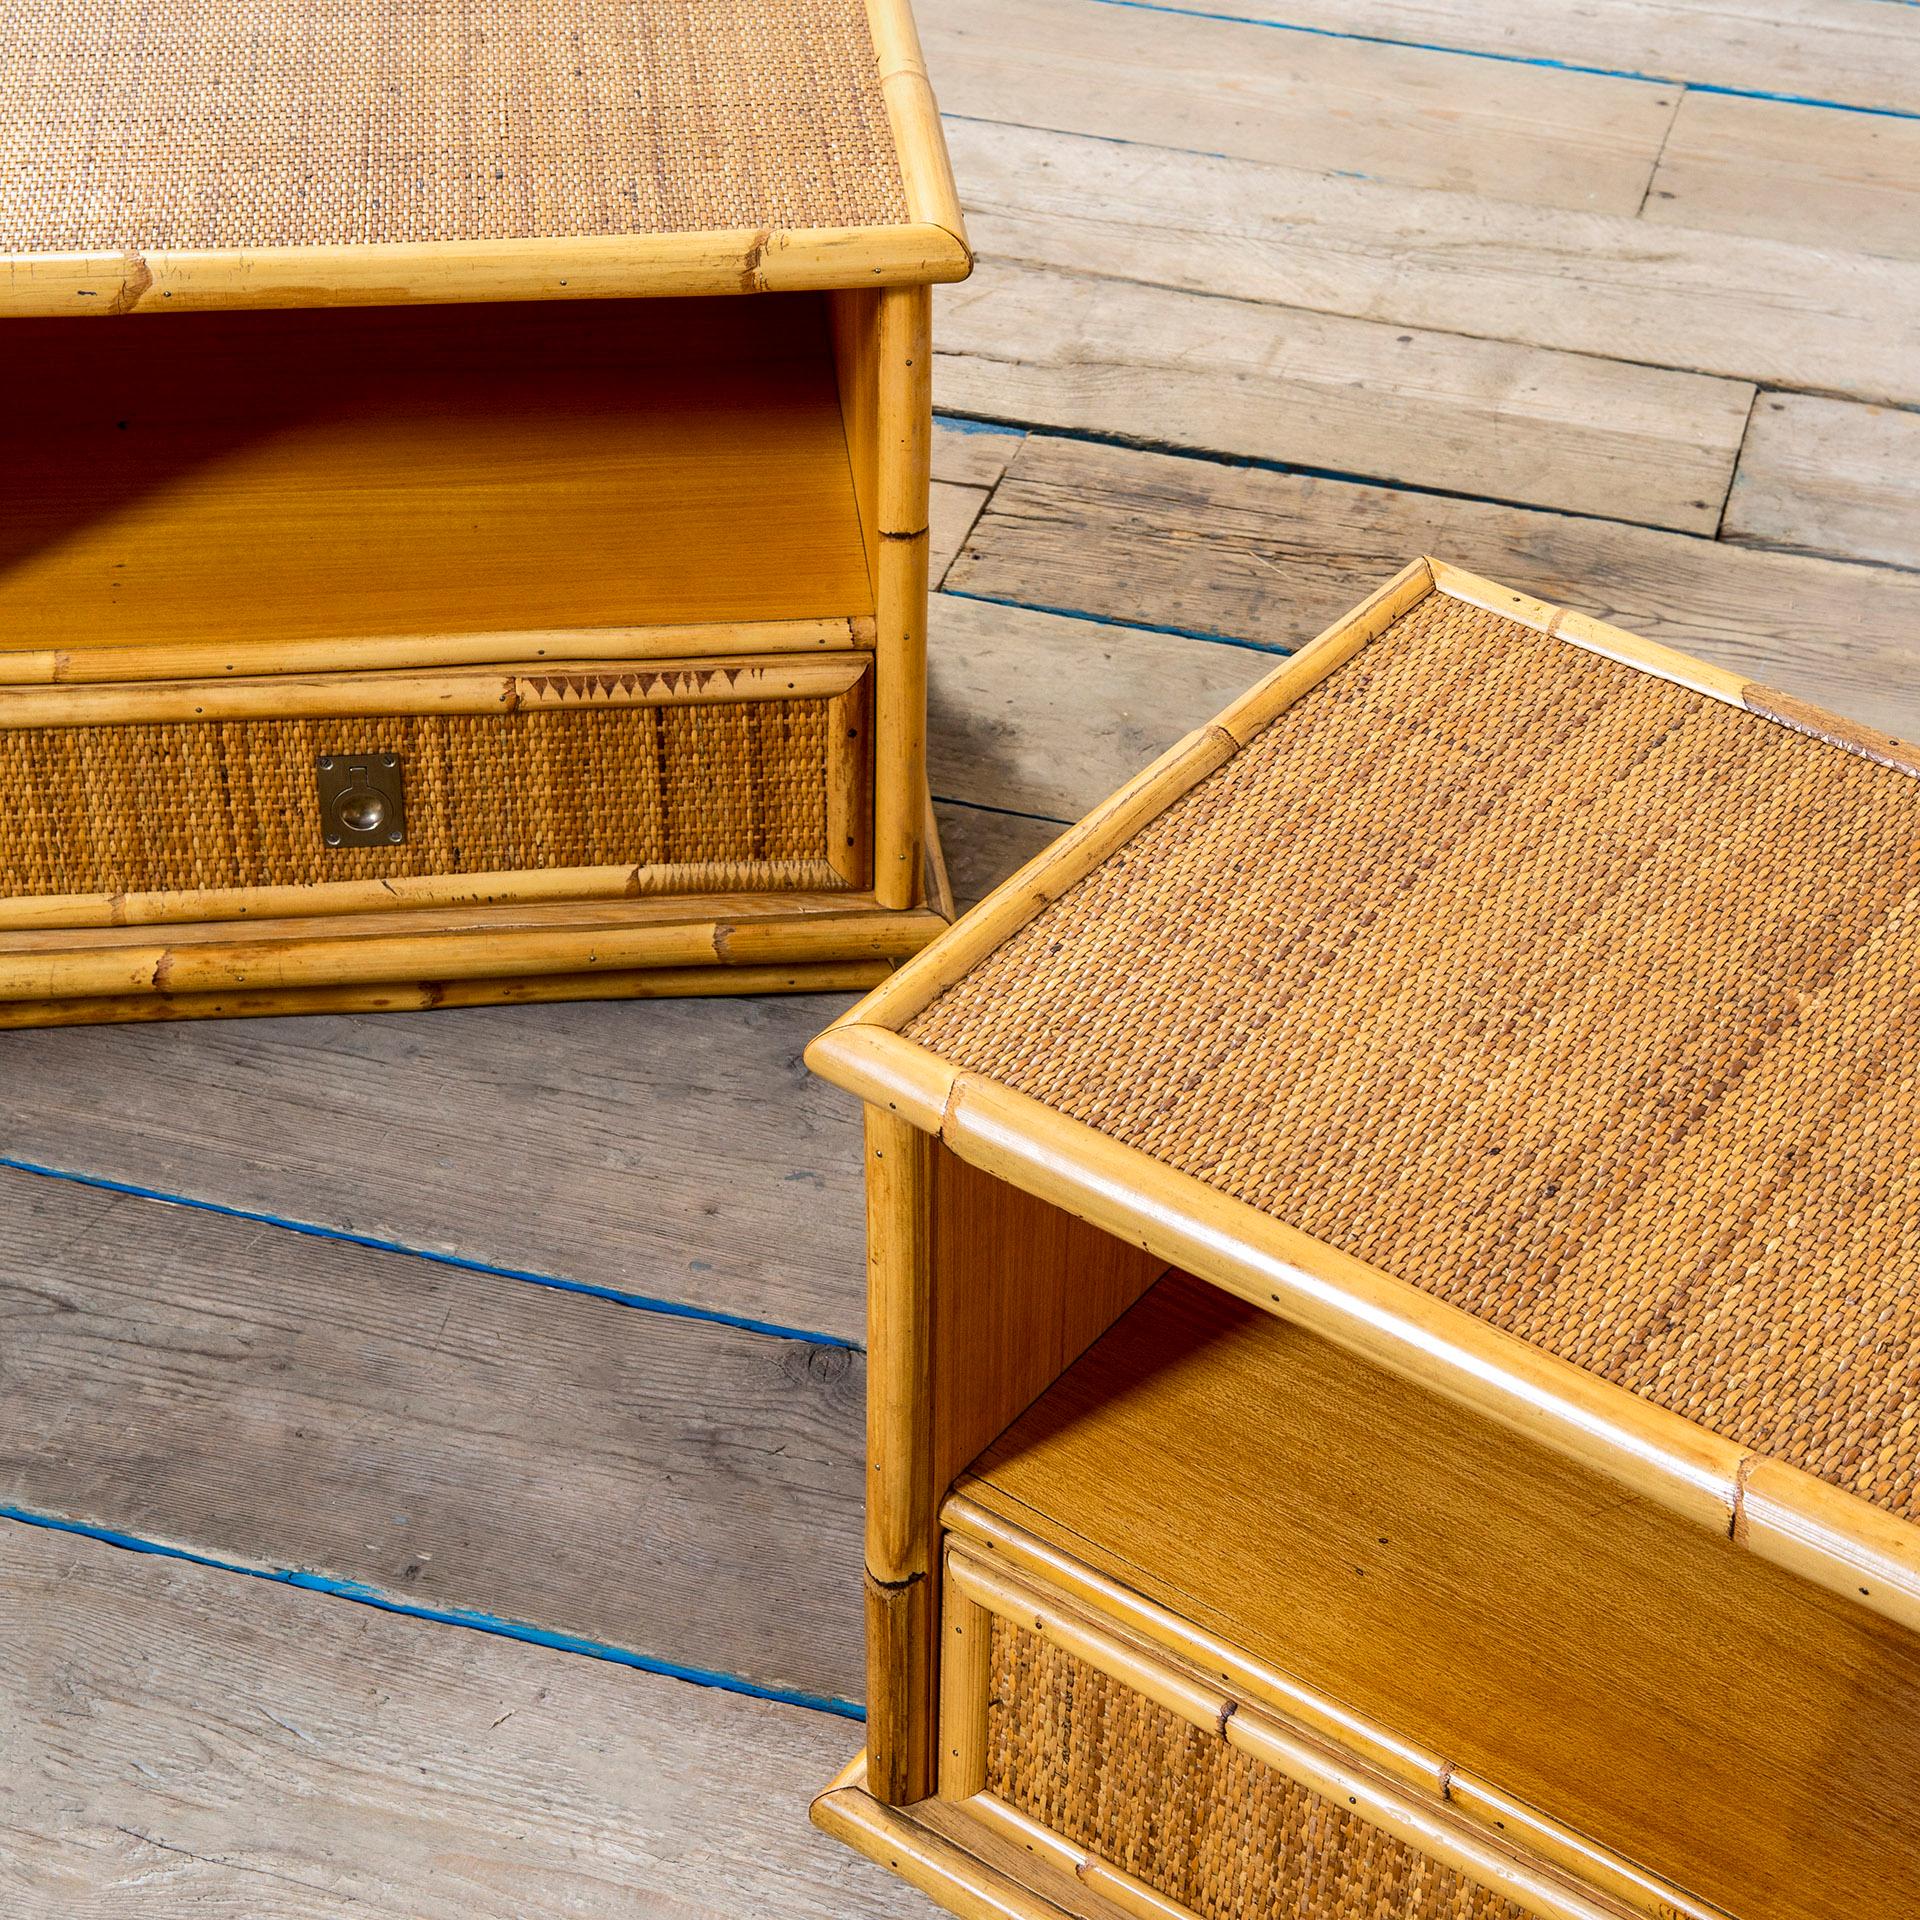 Italian 20th Century Vivai del Sud Pair of Night Tables in Bamboo and Wicker '60s For Sale